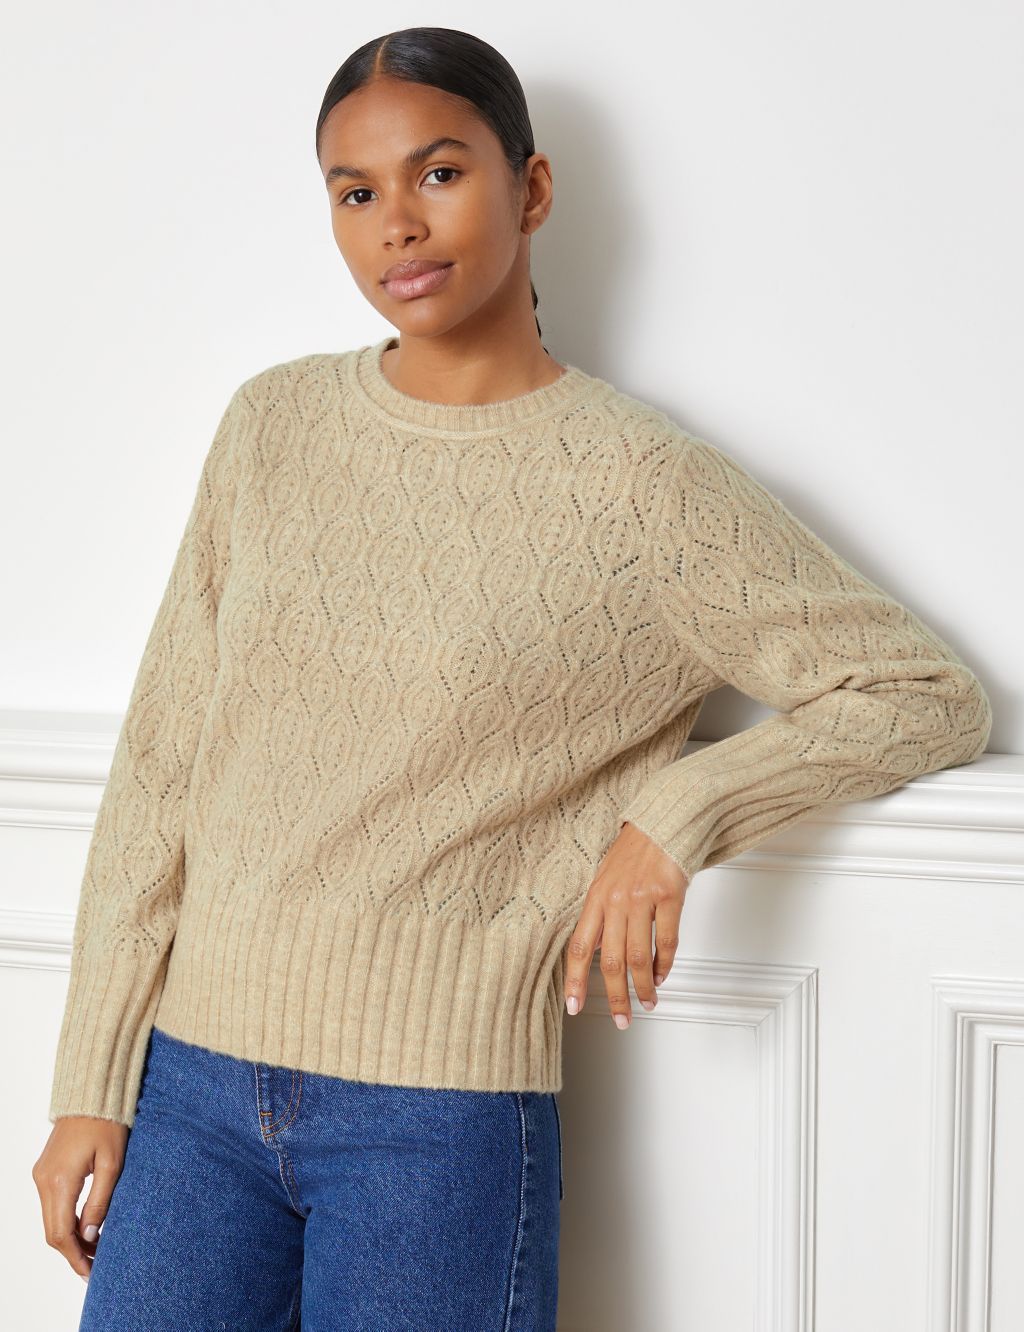 Pointelle Cable Knit Crew Neck Jumper image 1